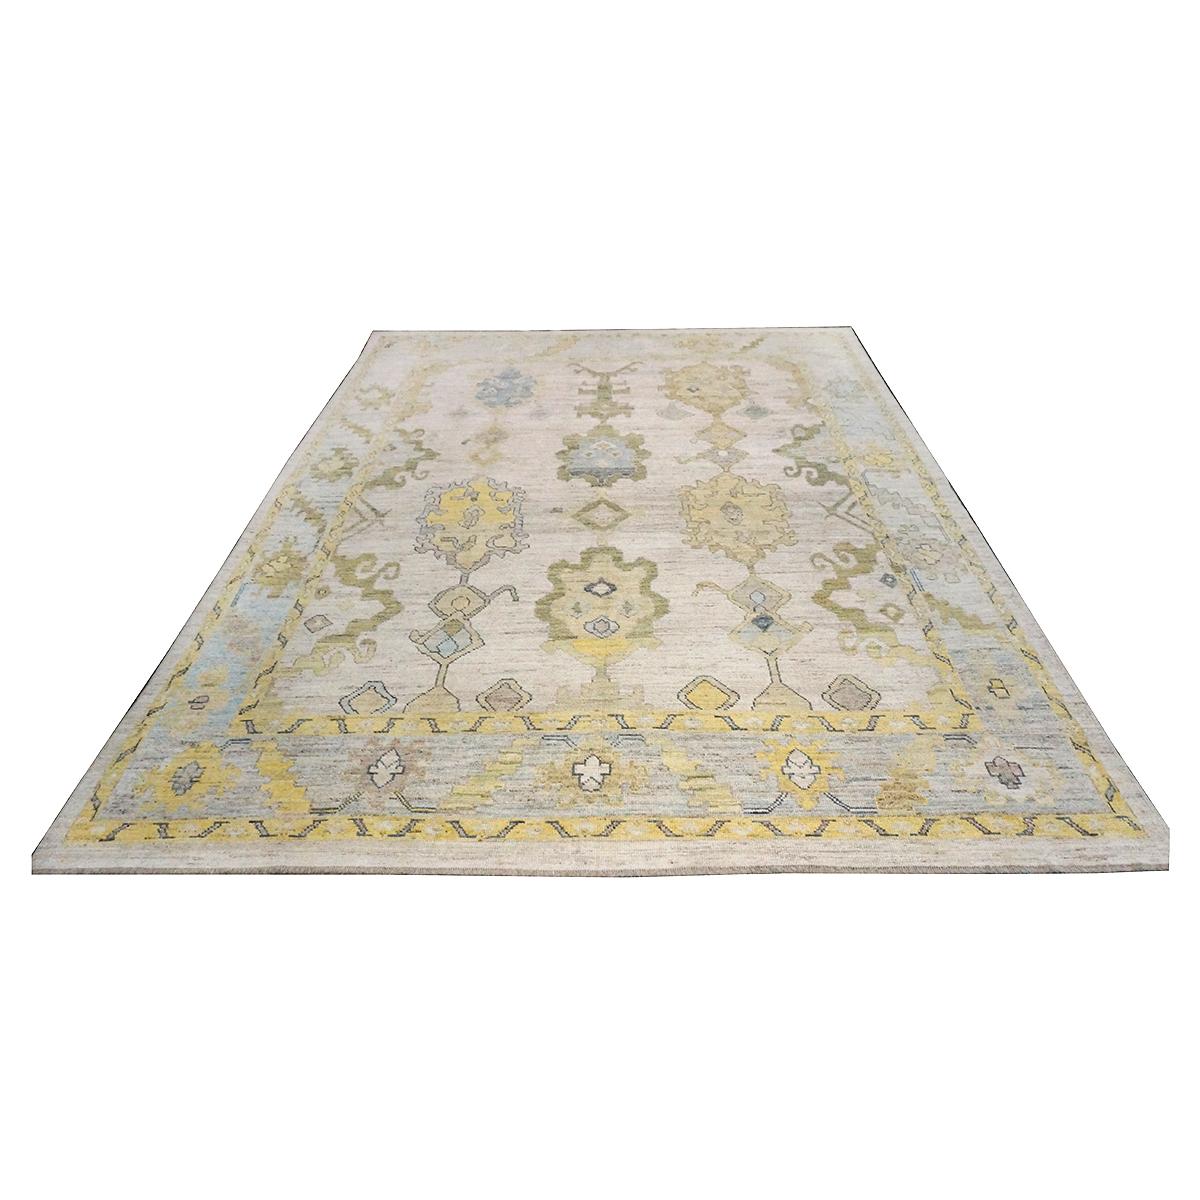   Ashly Fine Rugs presents a 21st-century Turkish Oushak 10x13 Handmade Area Rug. Oushak weavings began in a location just south of Istanbul, in a region that was to become the rugs namesake, Oushak. Although nomads first produced the rugs for